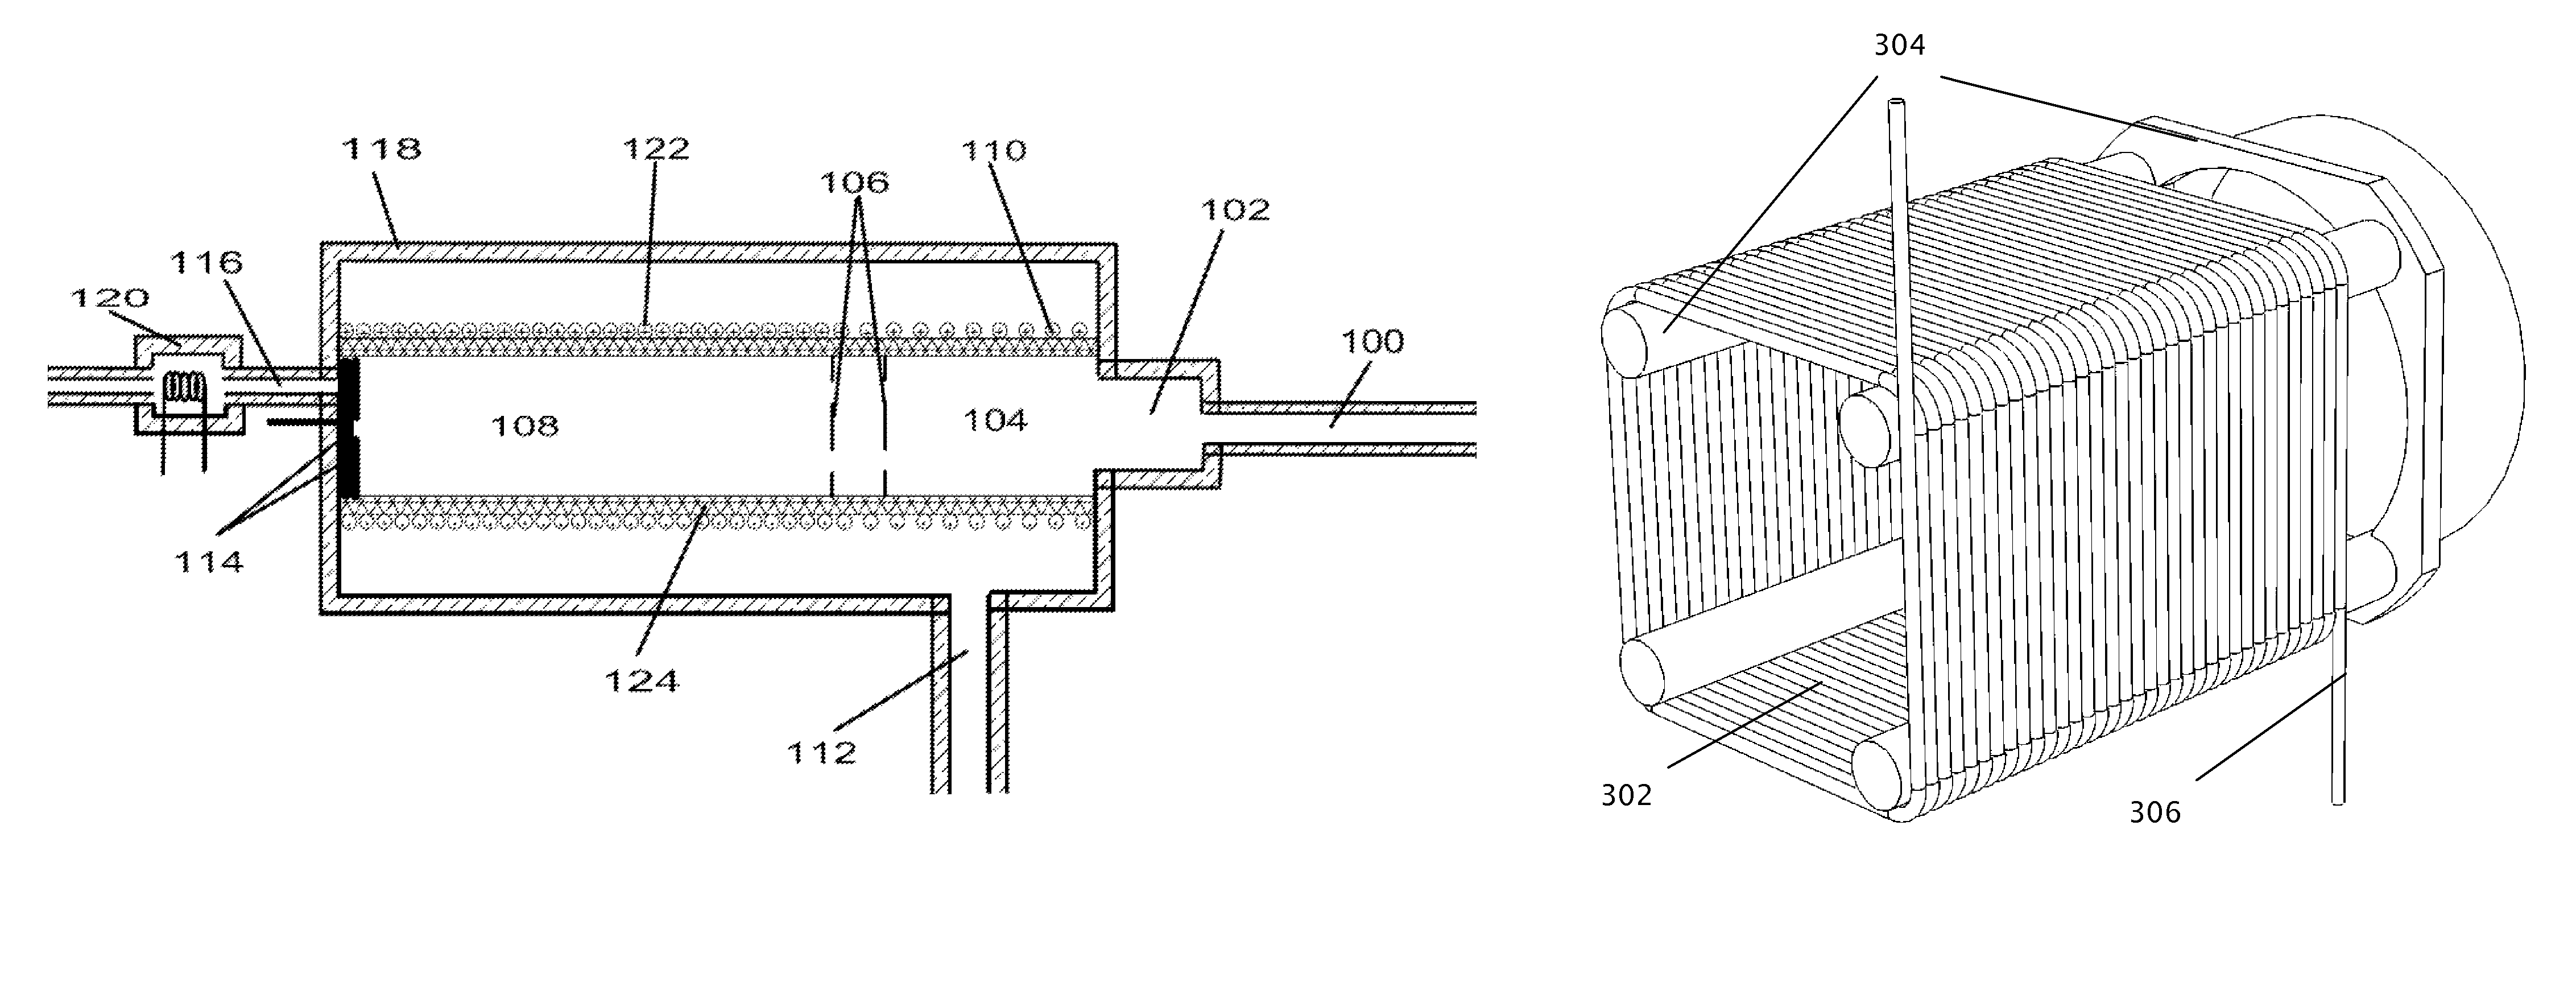 Ion mobility spectrometer apparatus and methods